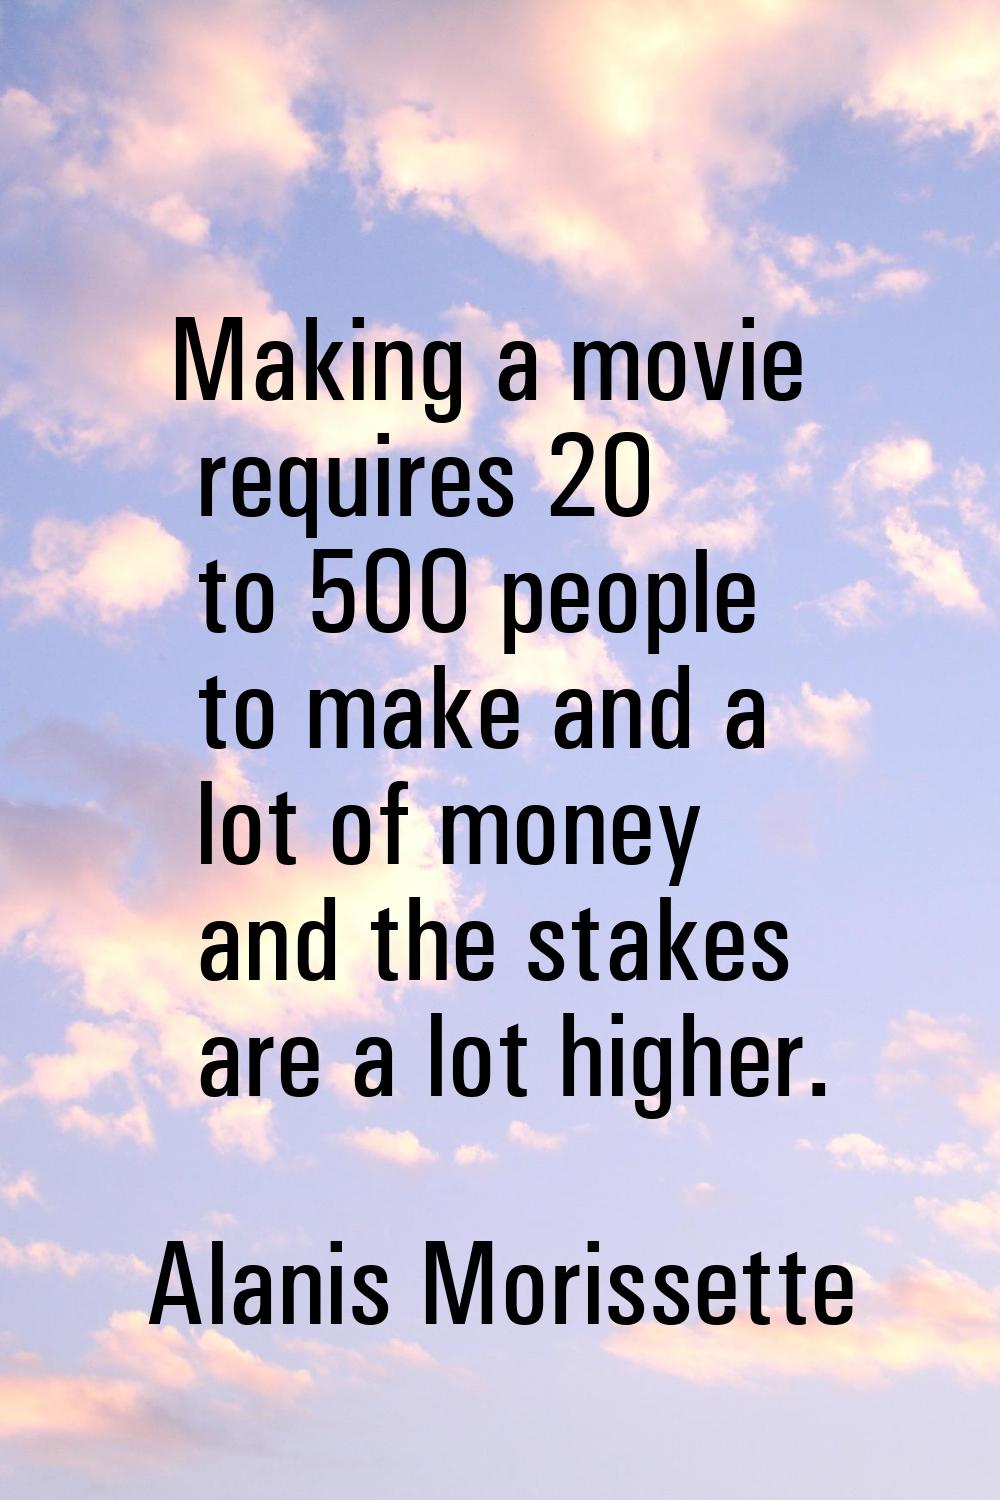 Making a movie requires 20 to 500 people to make and a lot of money and the stakes are a lot higher